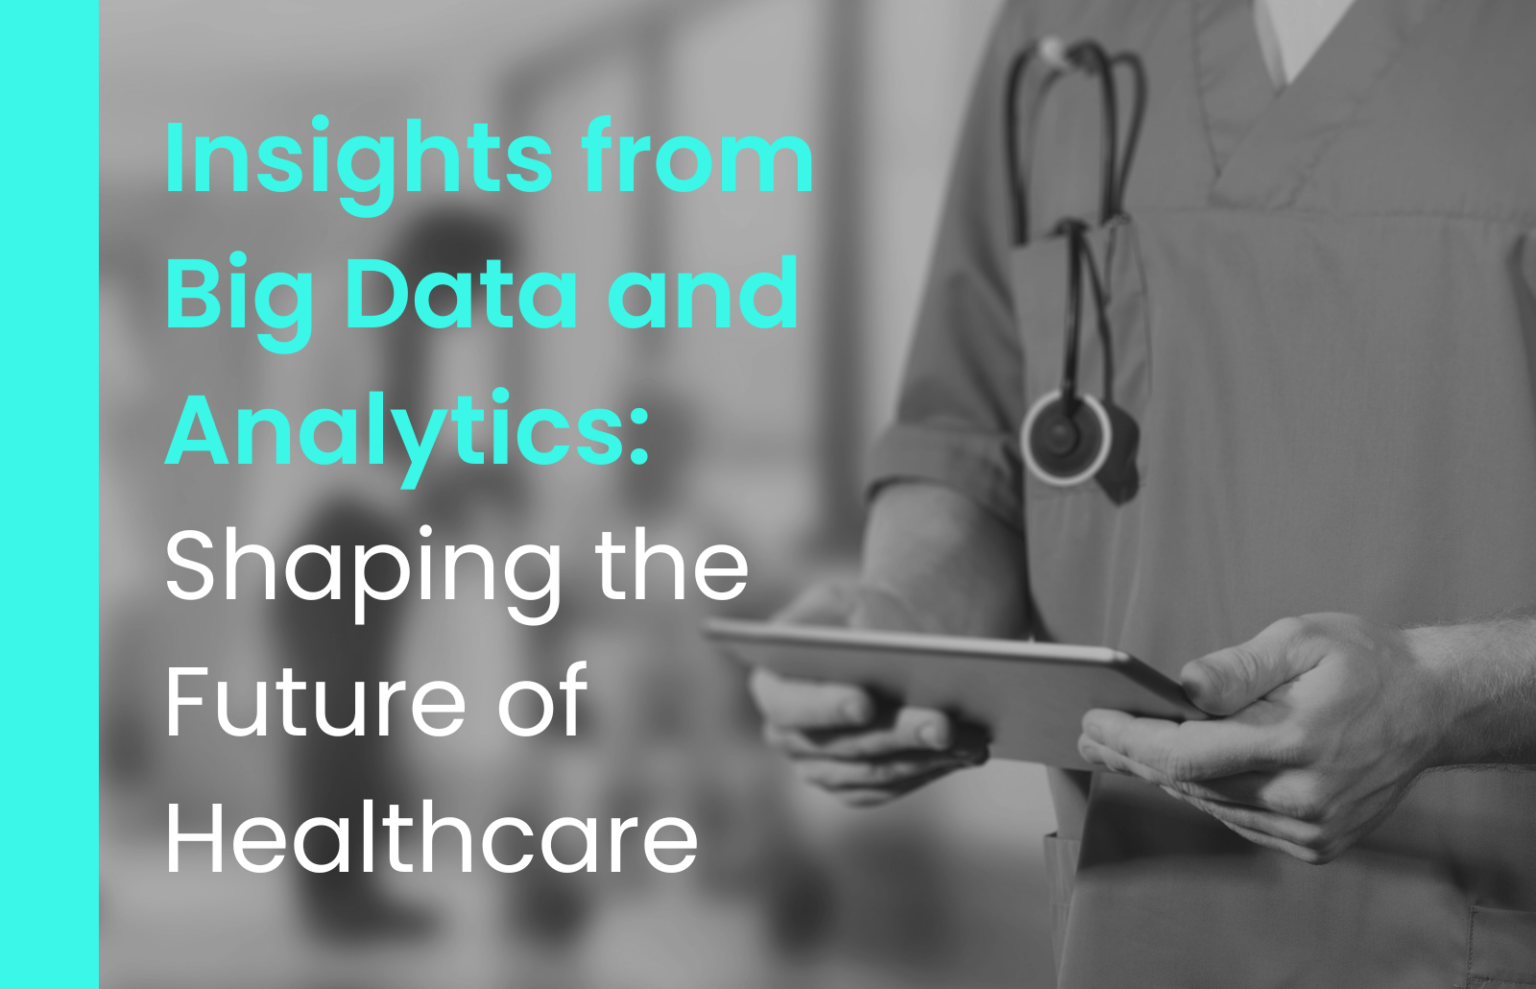 Big Data and Analytics in healthcare